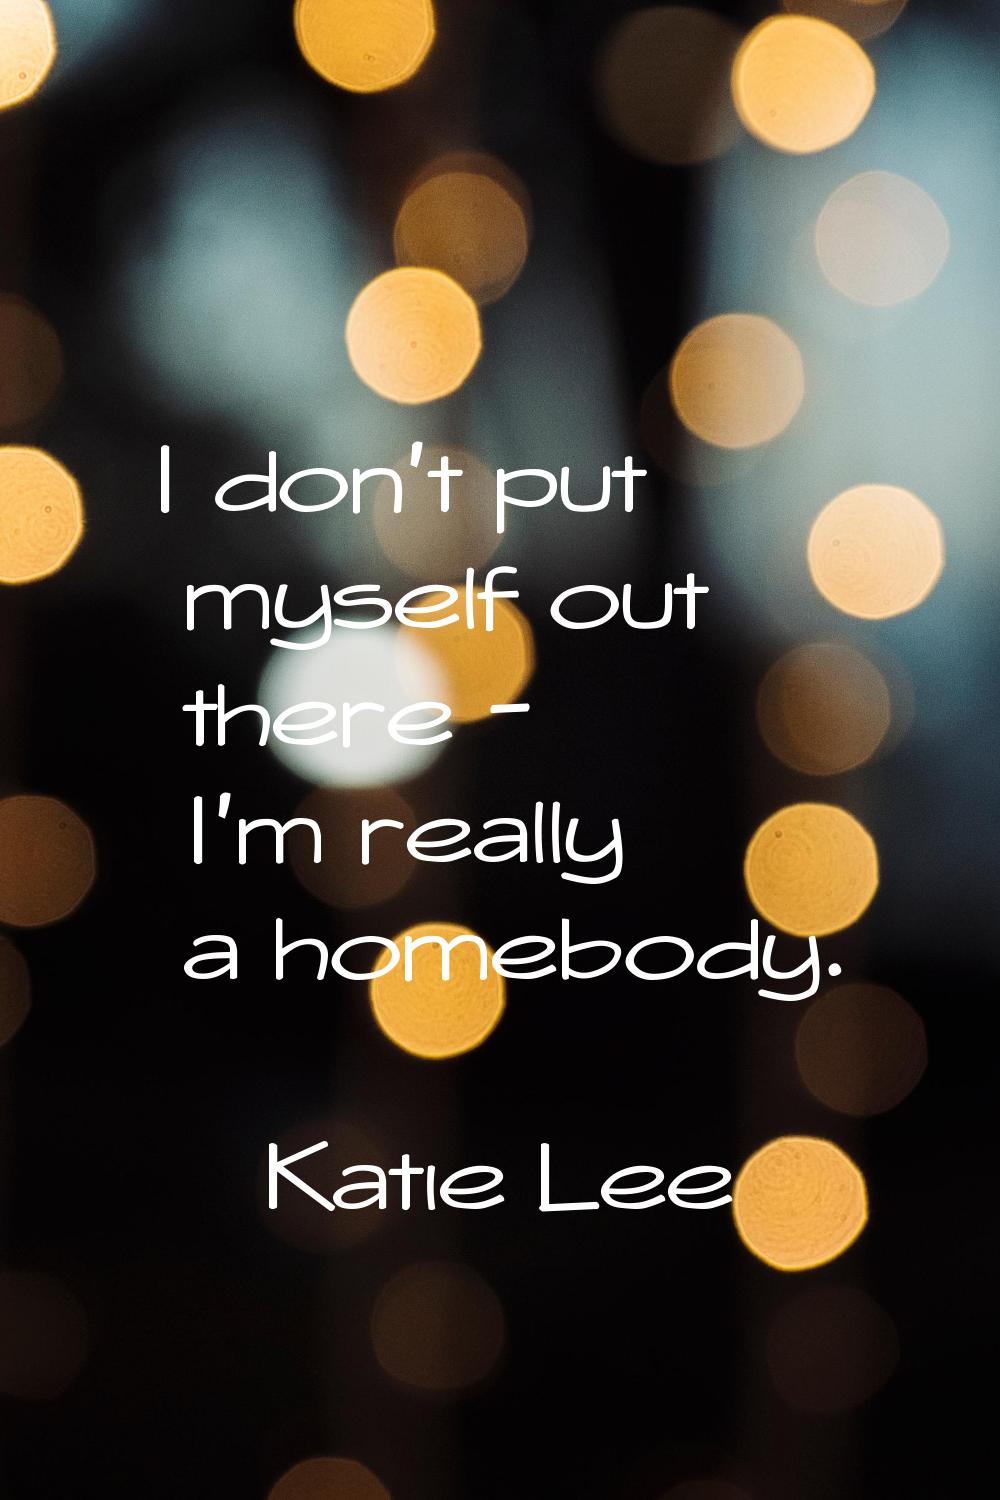 I don't put myself out there - I'm really a homebody.